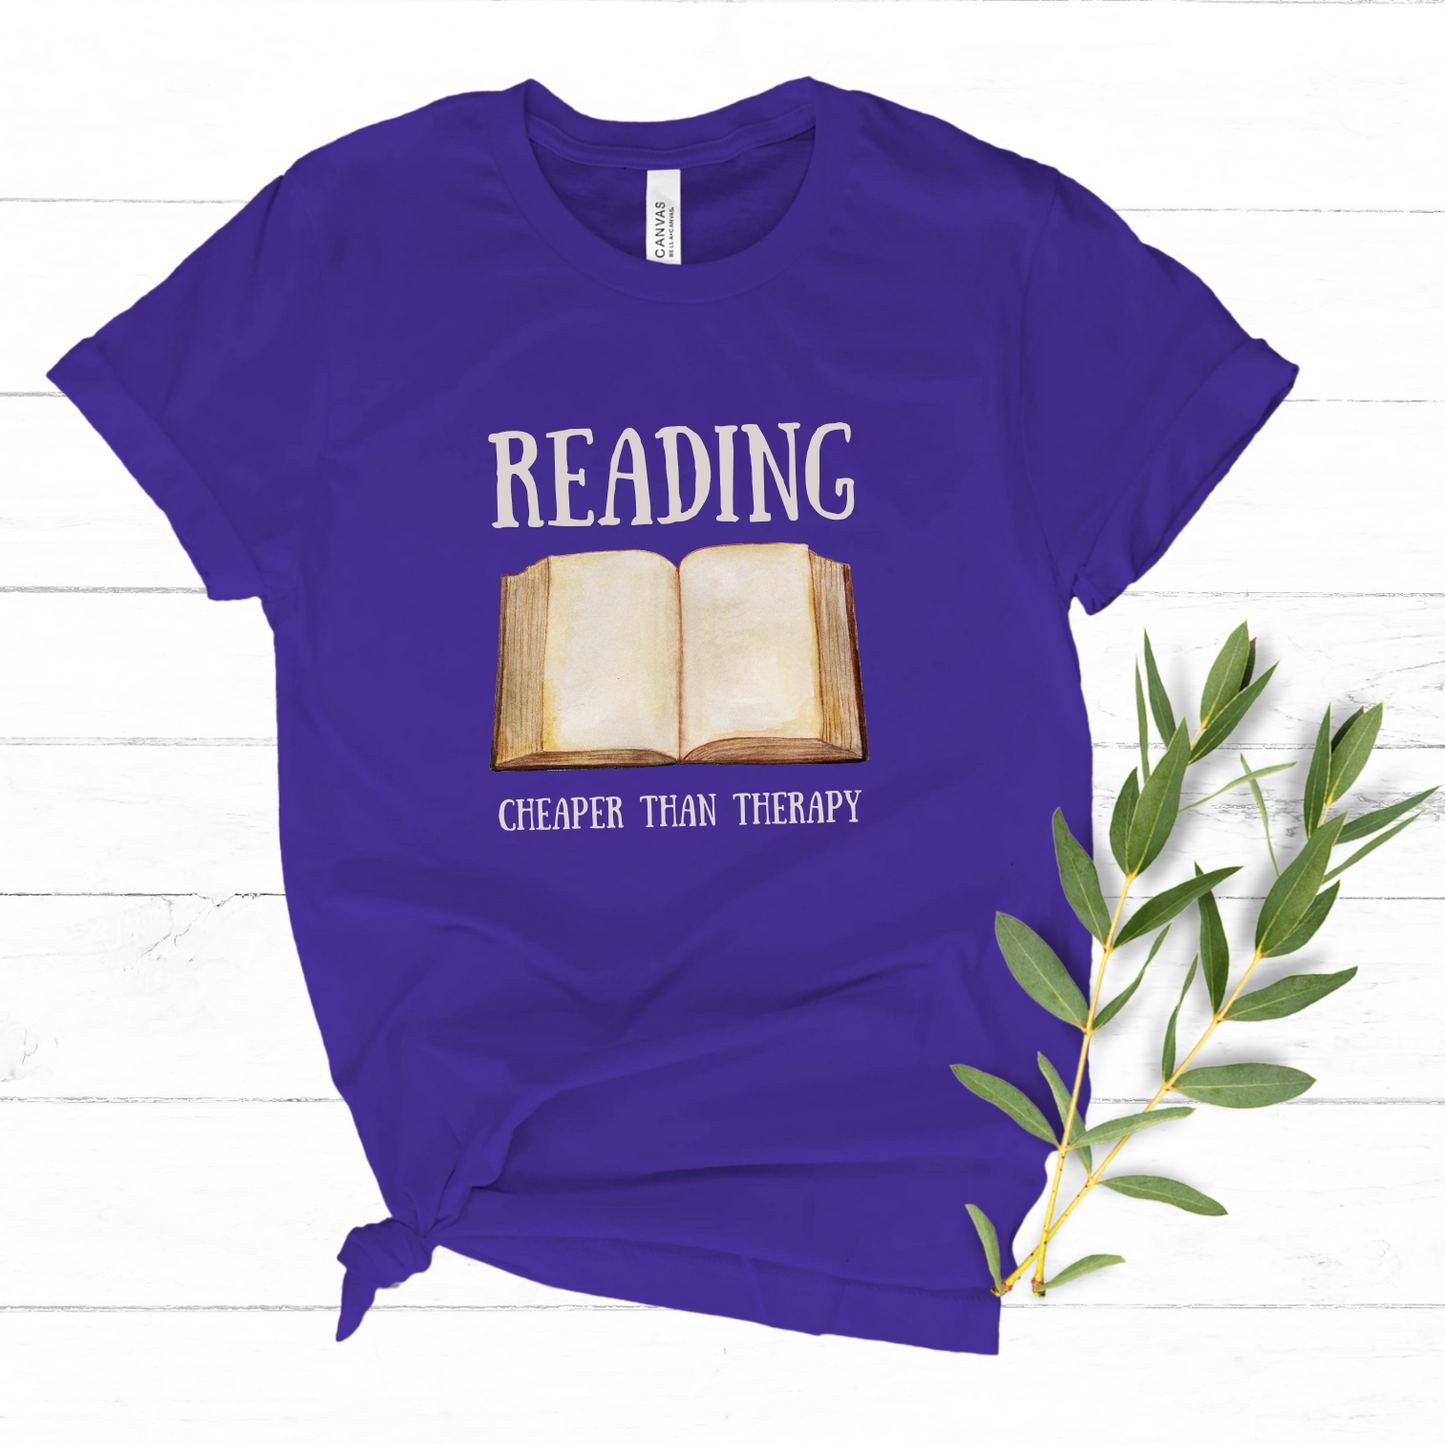 The team purple color of this t-shirt match the boldness of the humor in this book-lover's inside joke. Perfect addition to any book-lover's wardrobe.